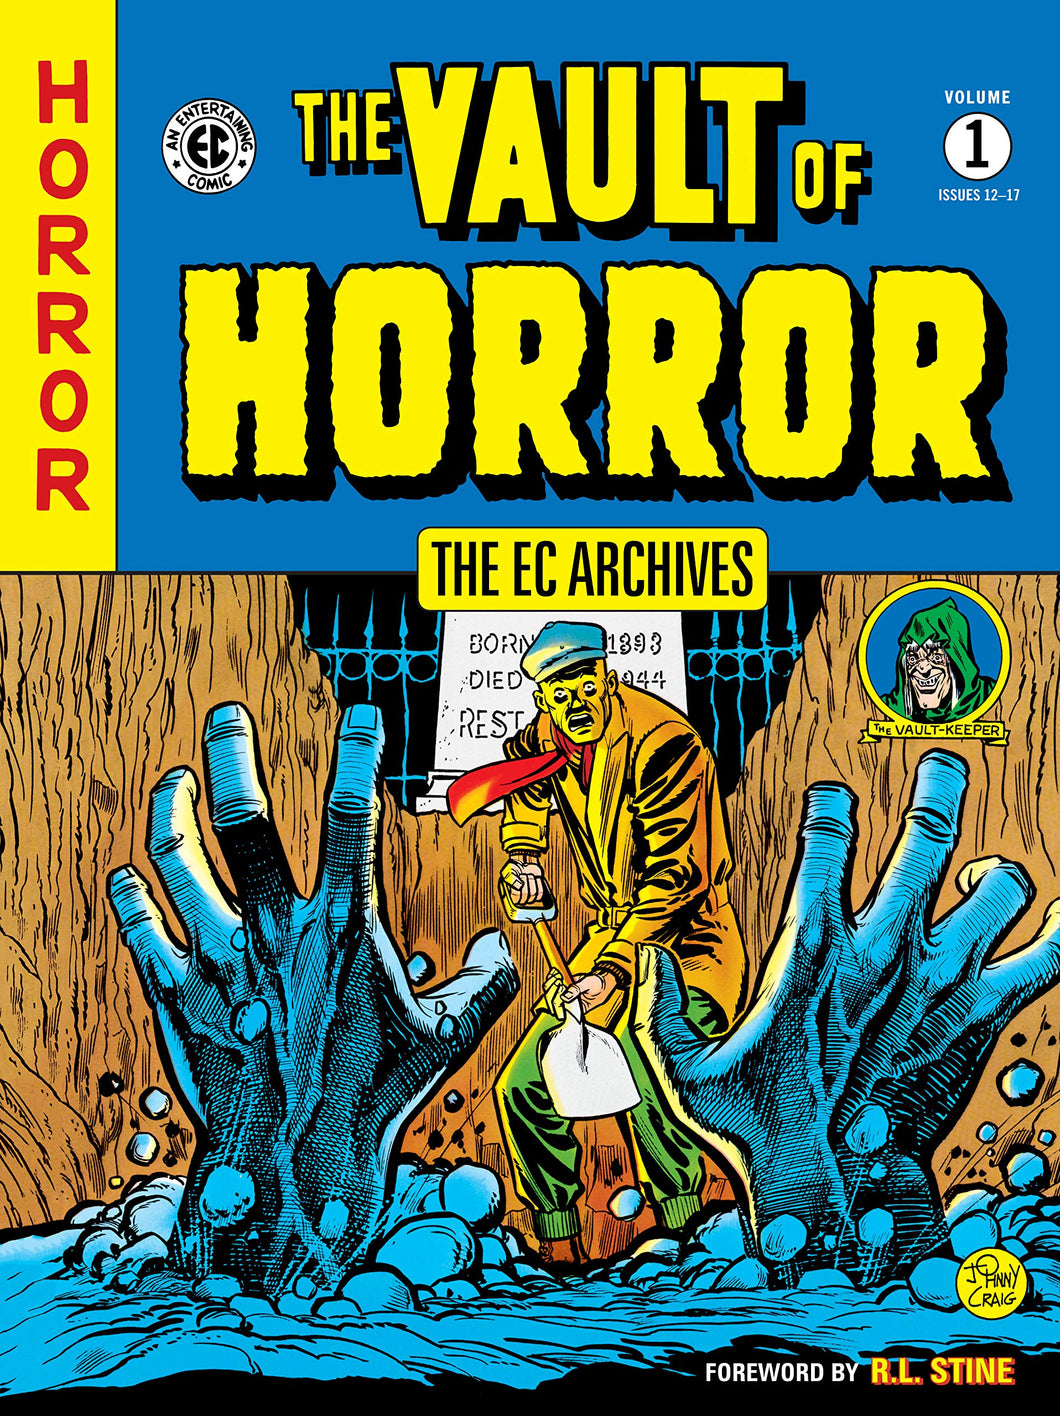 The EC Archives: The Vault of Horror Vol. 1